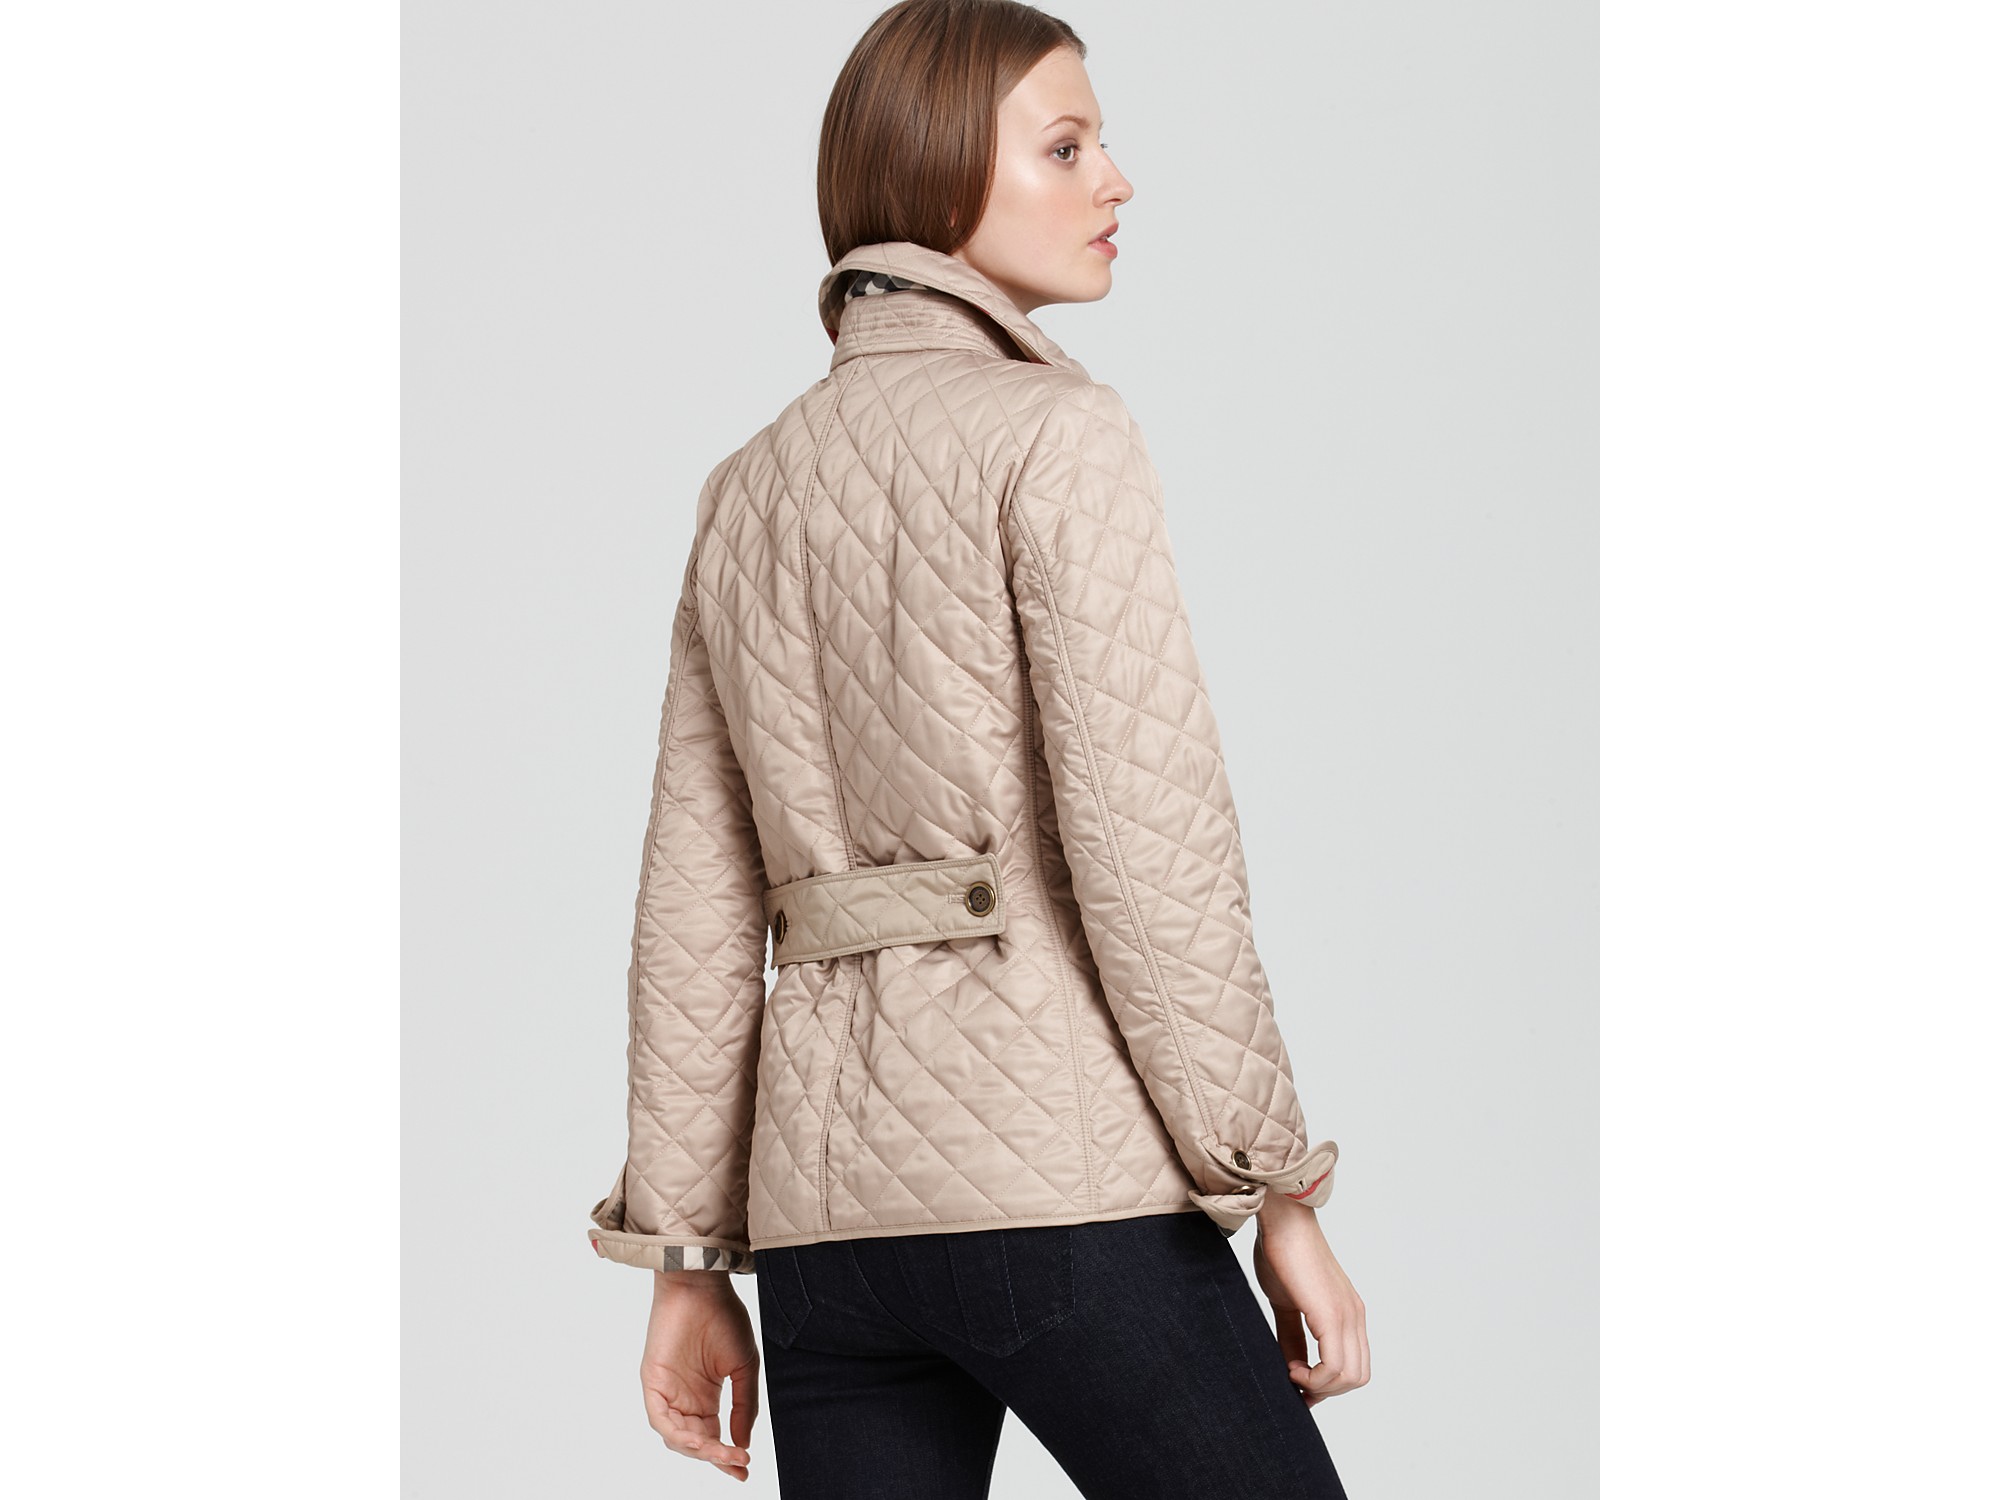 Burberry Brit Quilted Jacket in Natural | Lyst